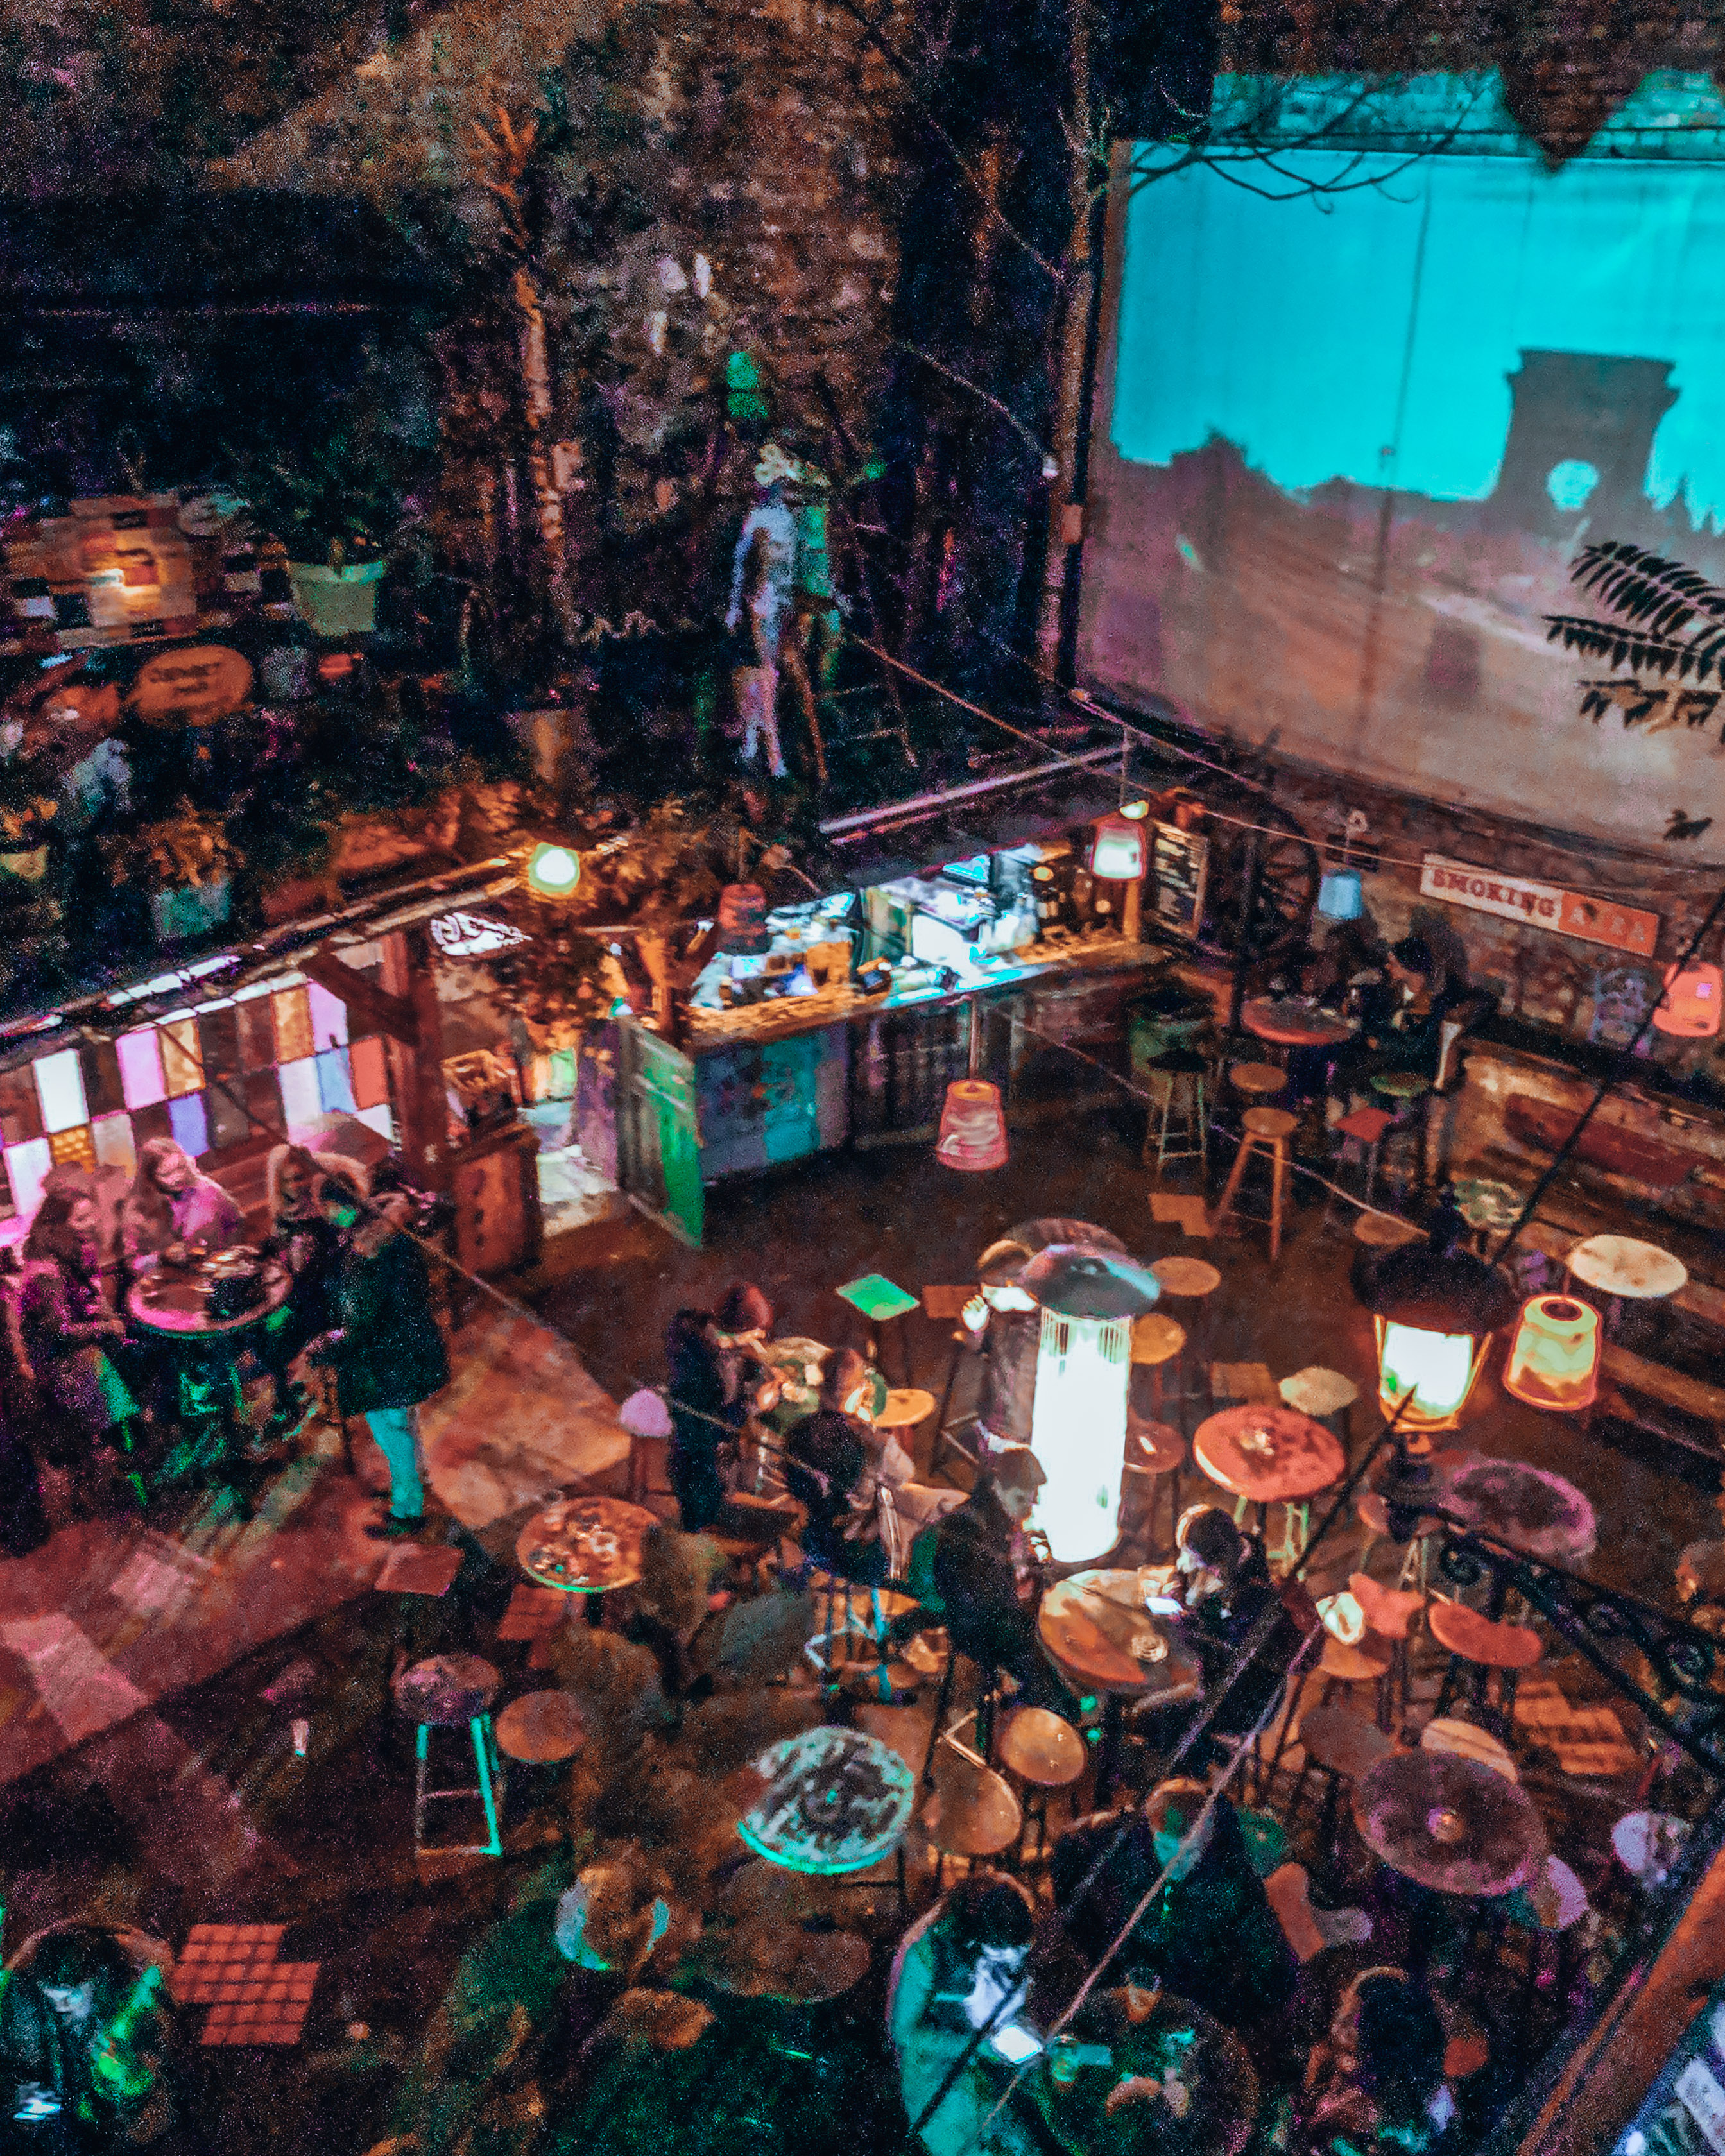 A view from the second floor of Szimpla Kert in Budapest, Hungary